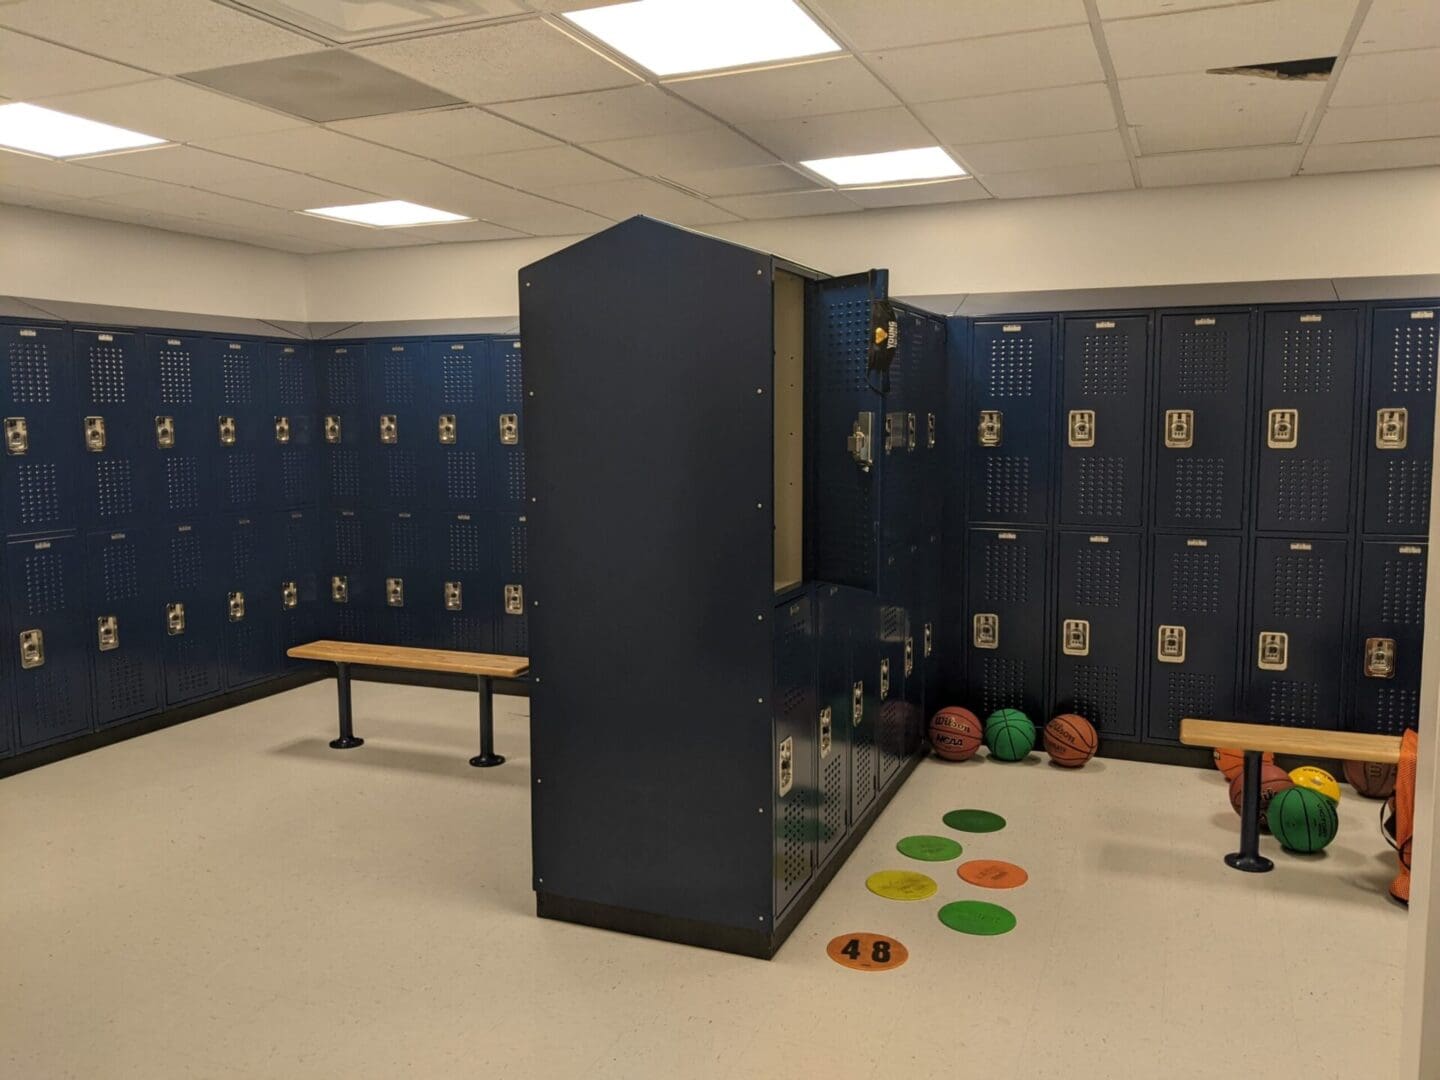 A room with many blue lockers and benches